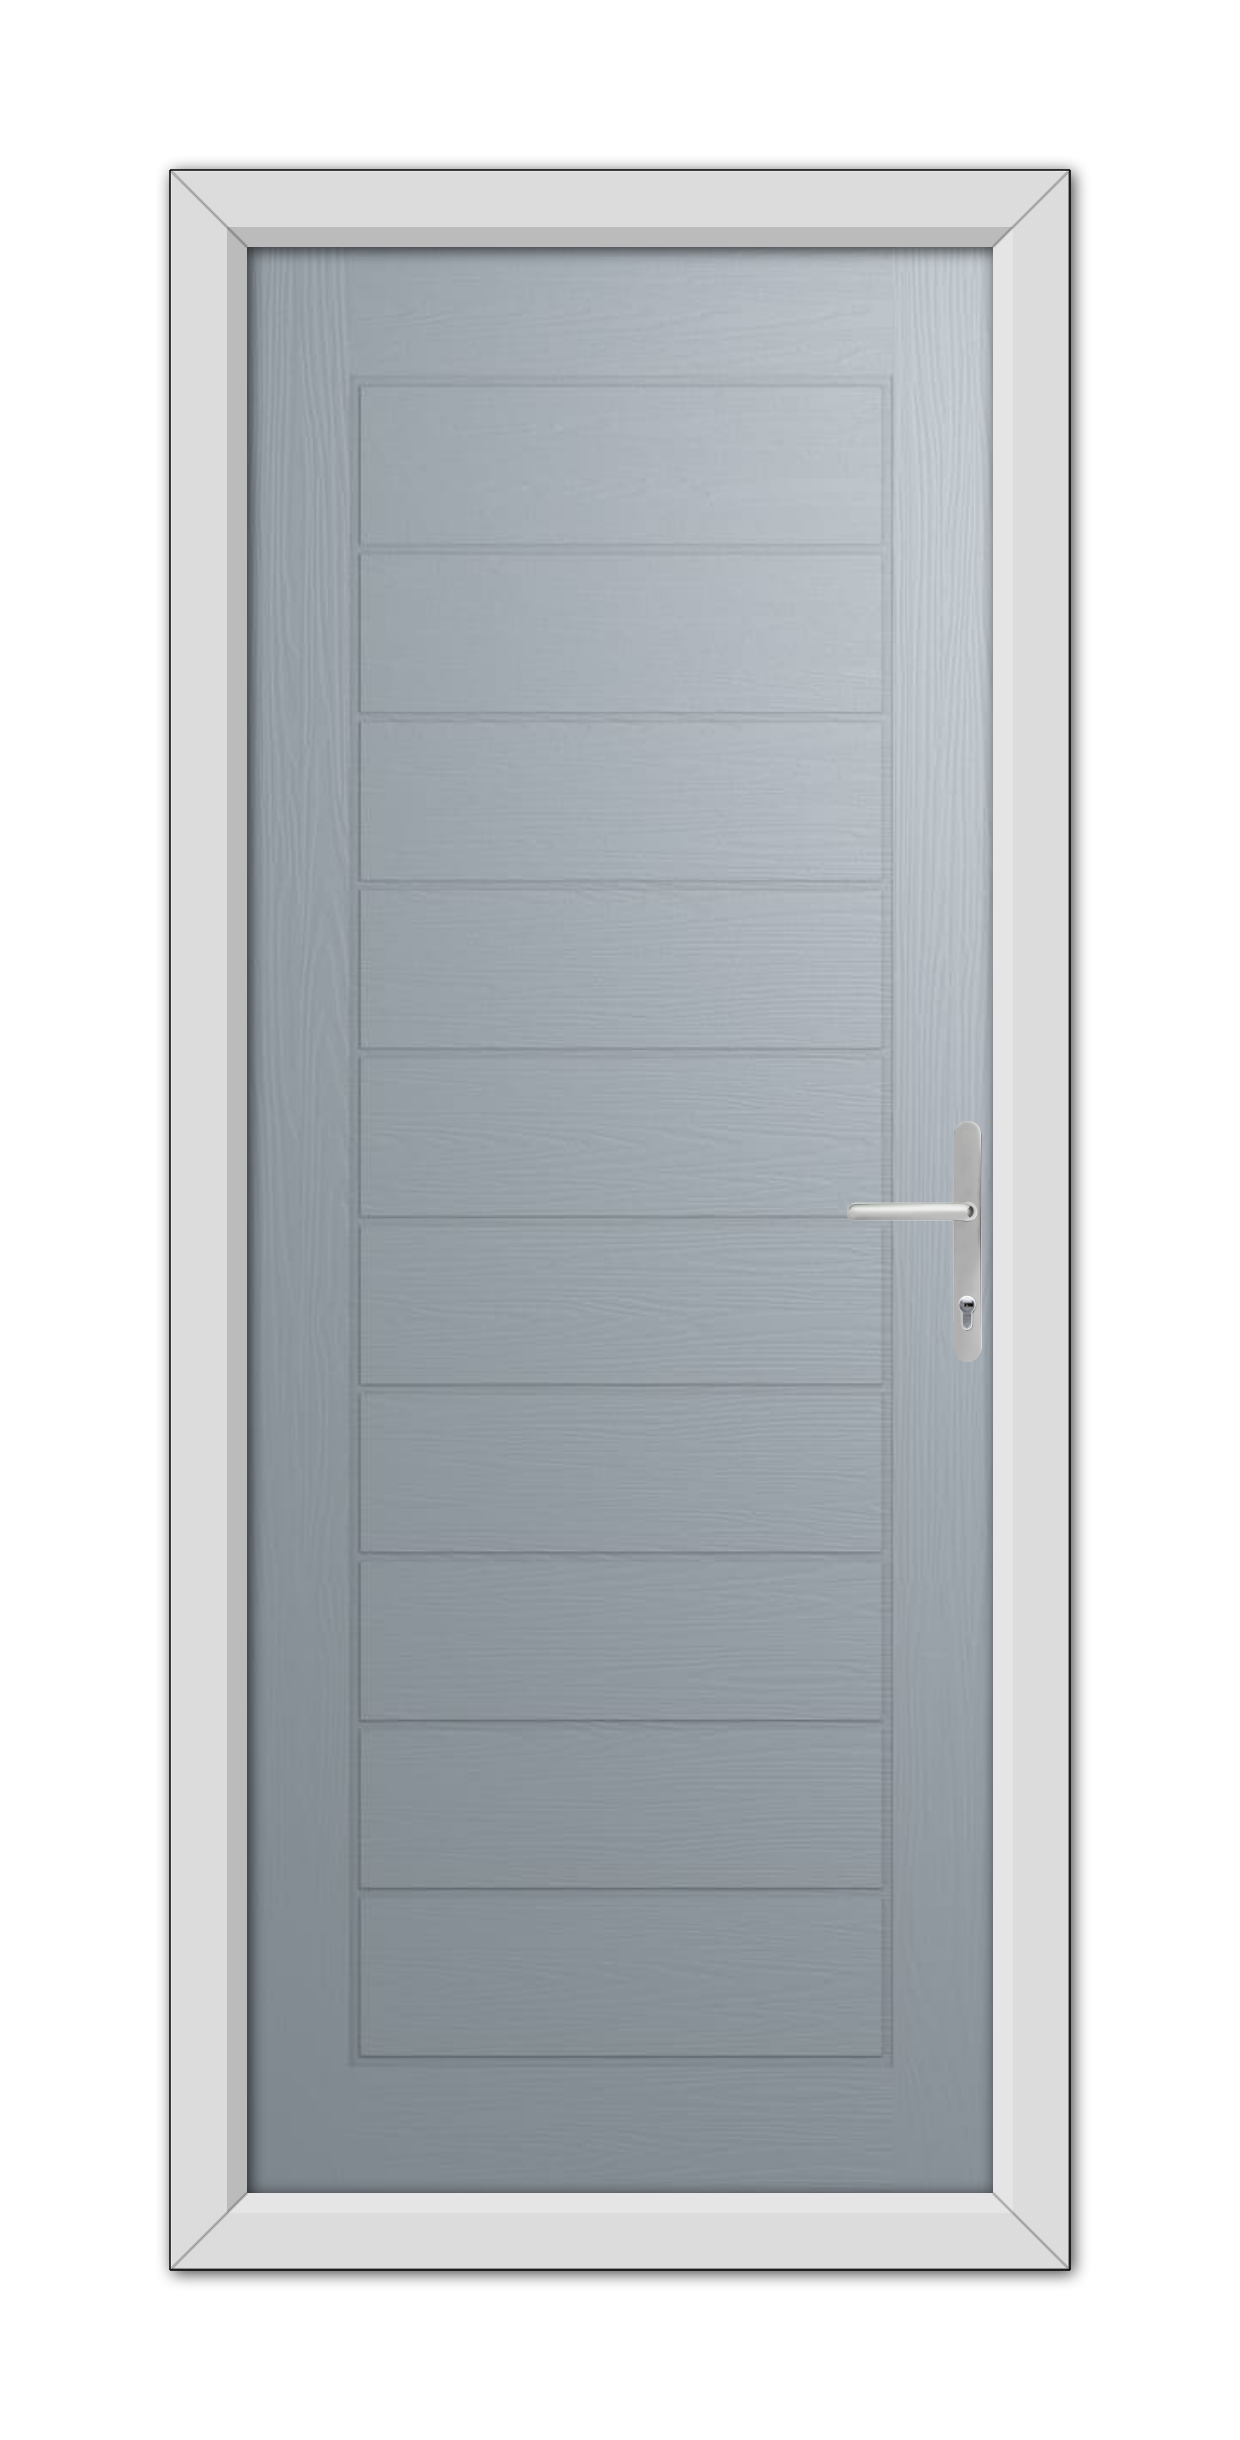 A modern French Grey Cambridge Composite Door 48mm Timber Core with horizontal panels and a metal handle, set in a white frame, isolated on a white background.